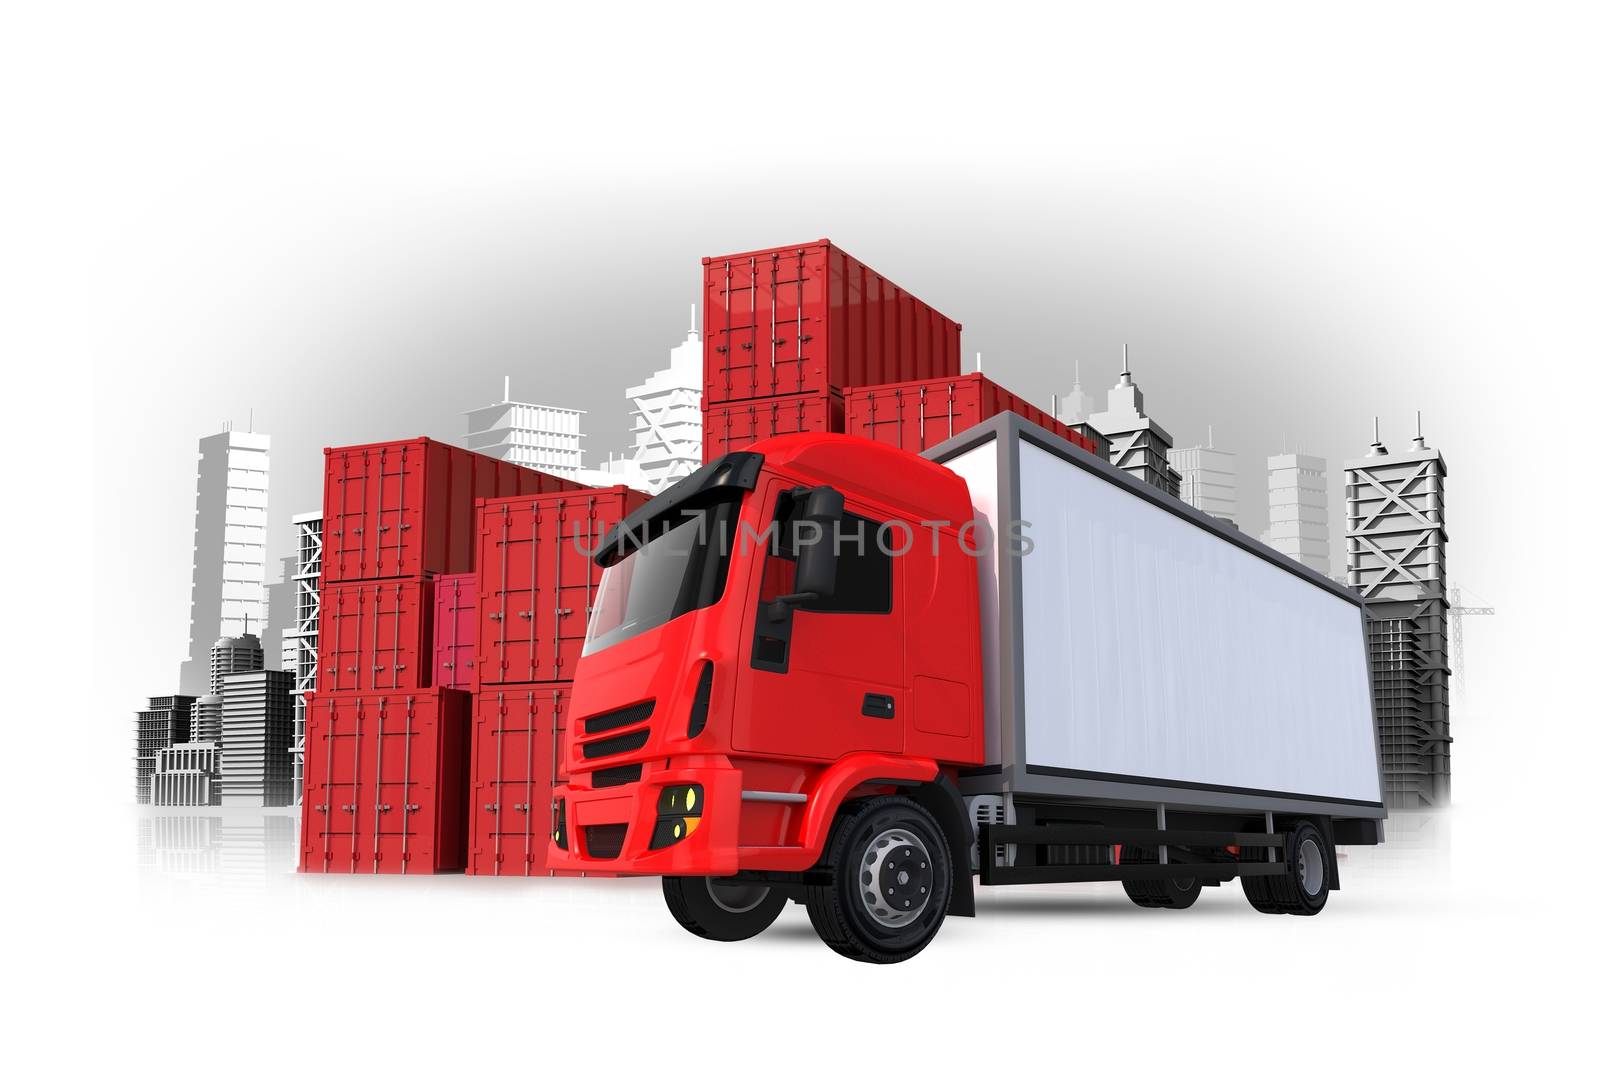 Cargo and Shipping 3D Concept Illustration. Red Cargo Truck, Cargo Containers and the City. Shipping Concept.